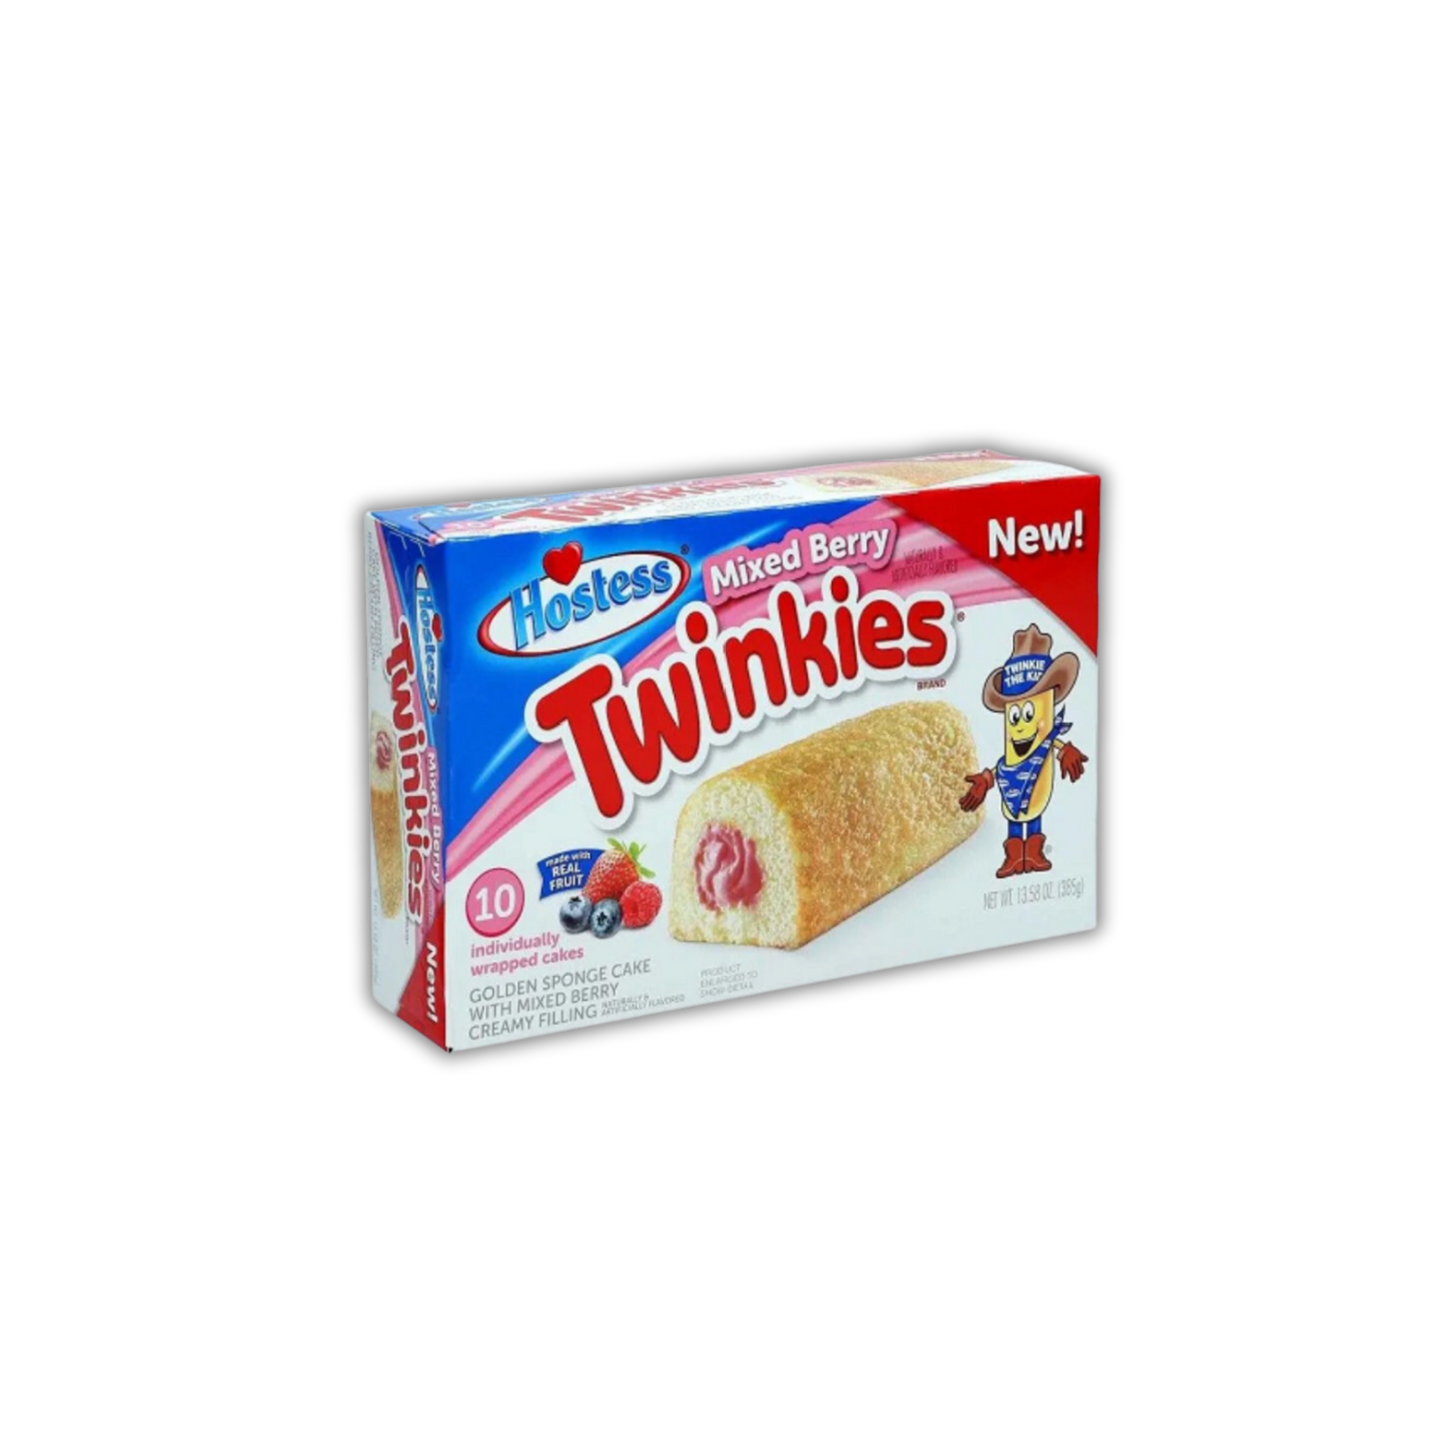 Hostess Twinkies Mixed Berry Golden Sponge Cake With Mixed Berry Creamy Filling 385g Box